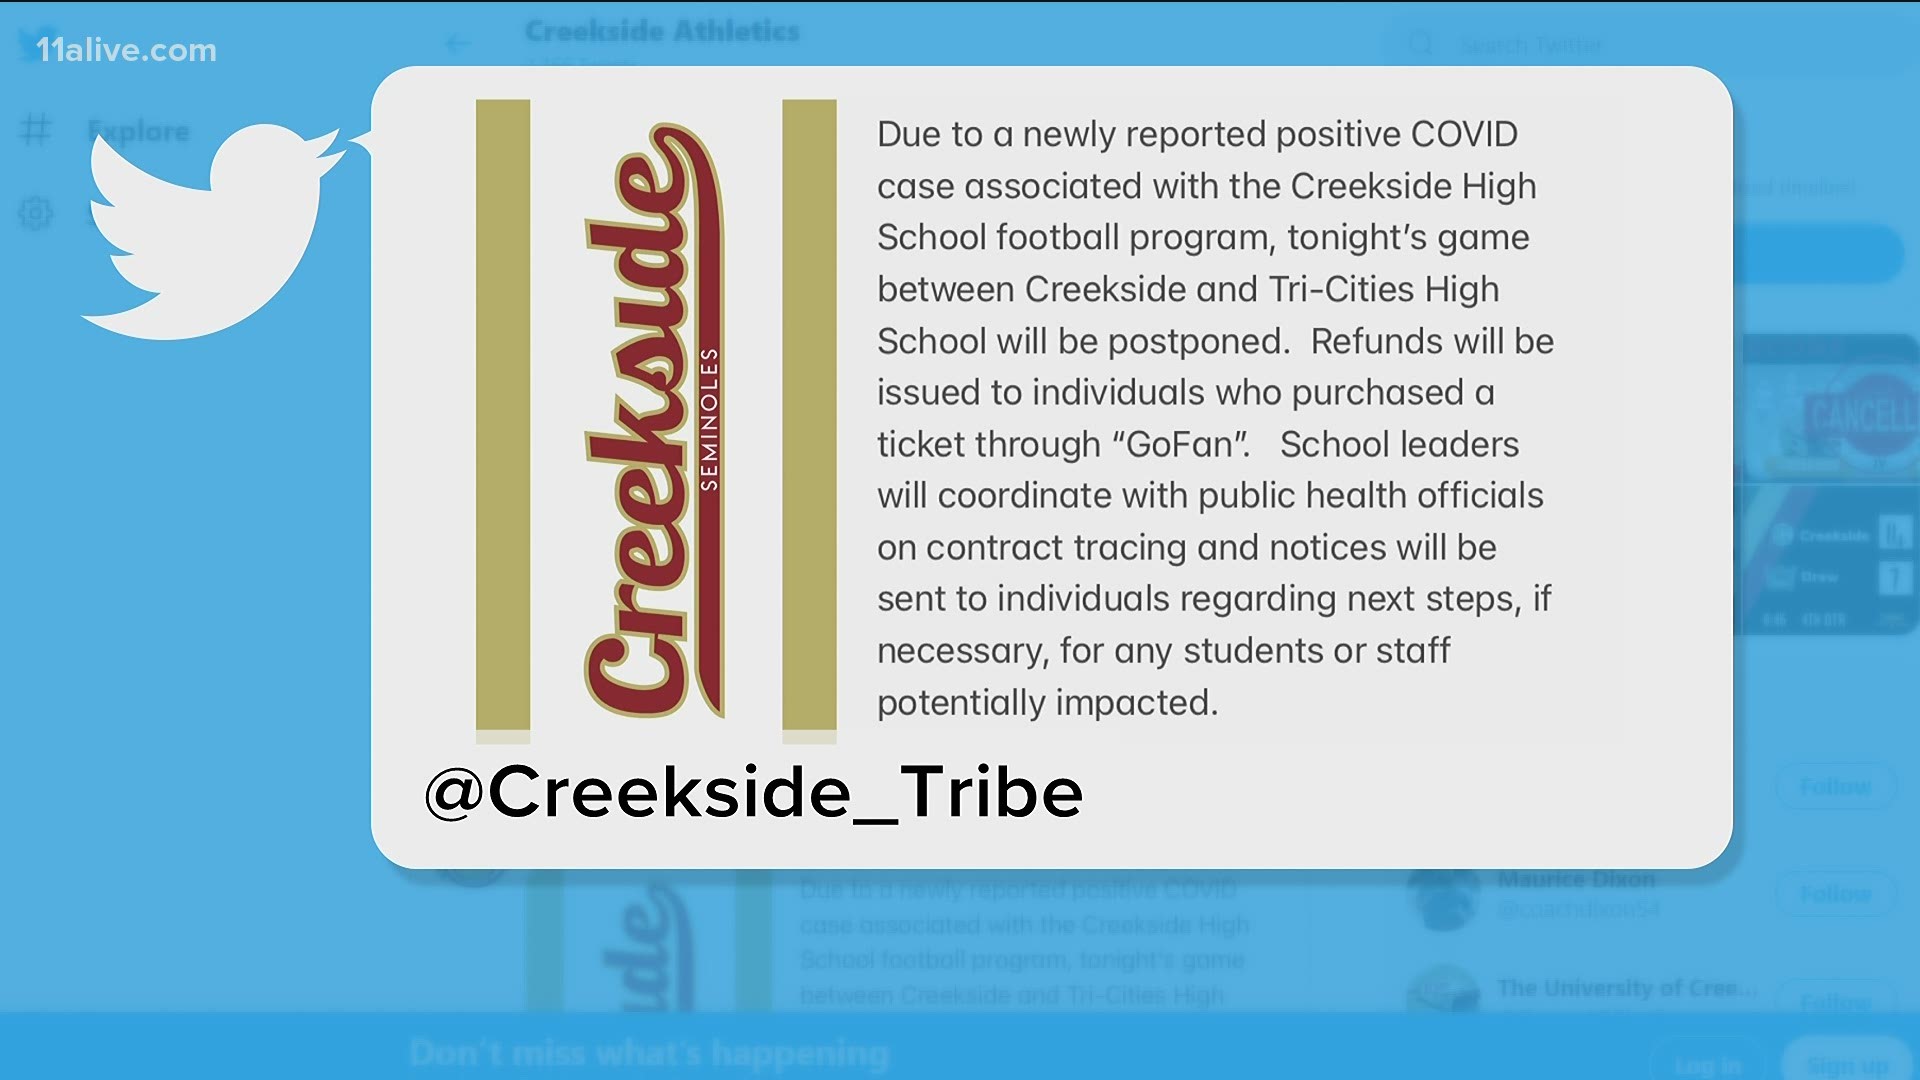 Creekside High School announced that its game on Friday against Tri-Cities had been postponed due to a COVID case.